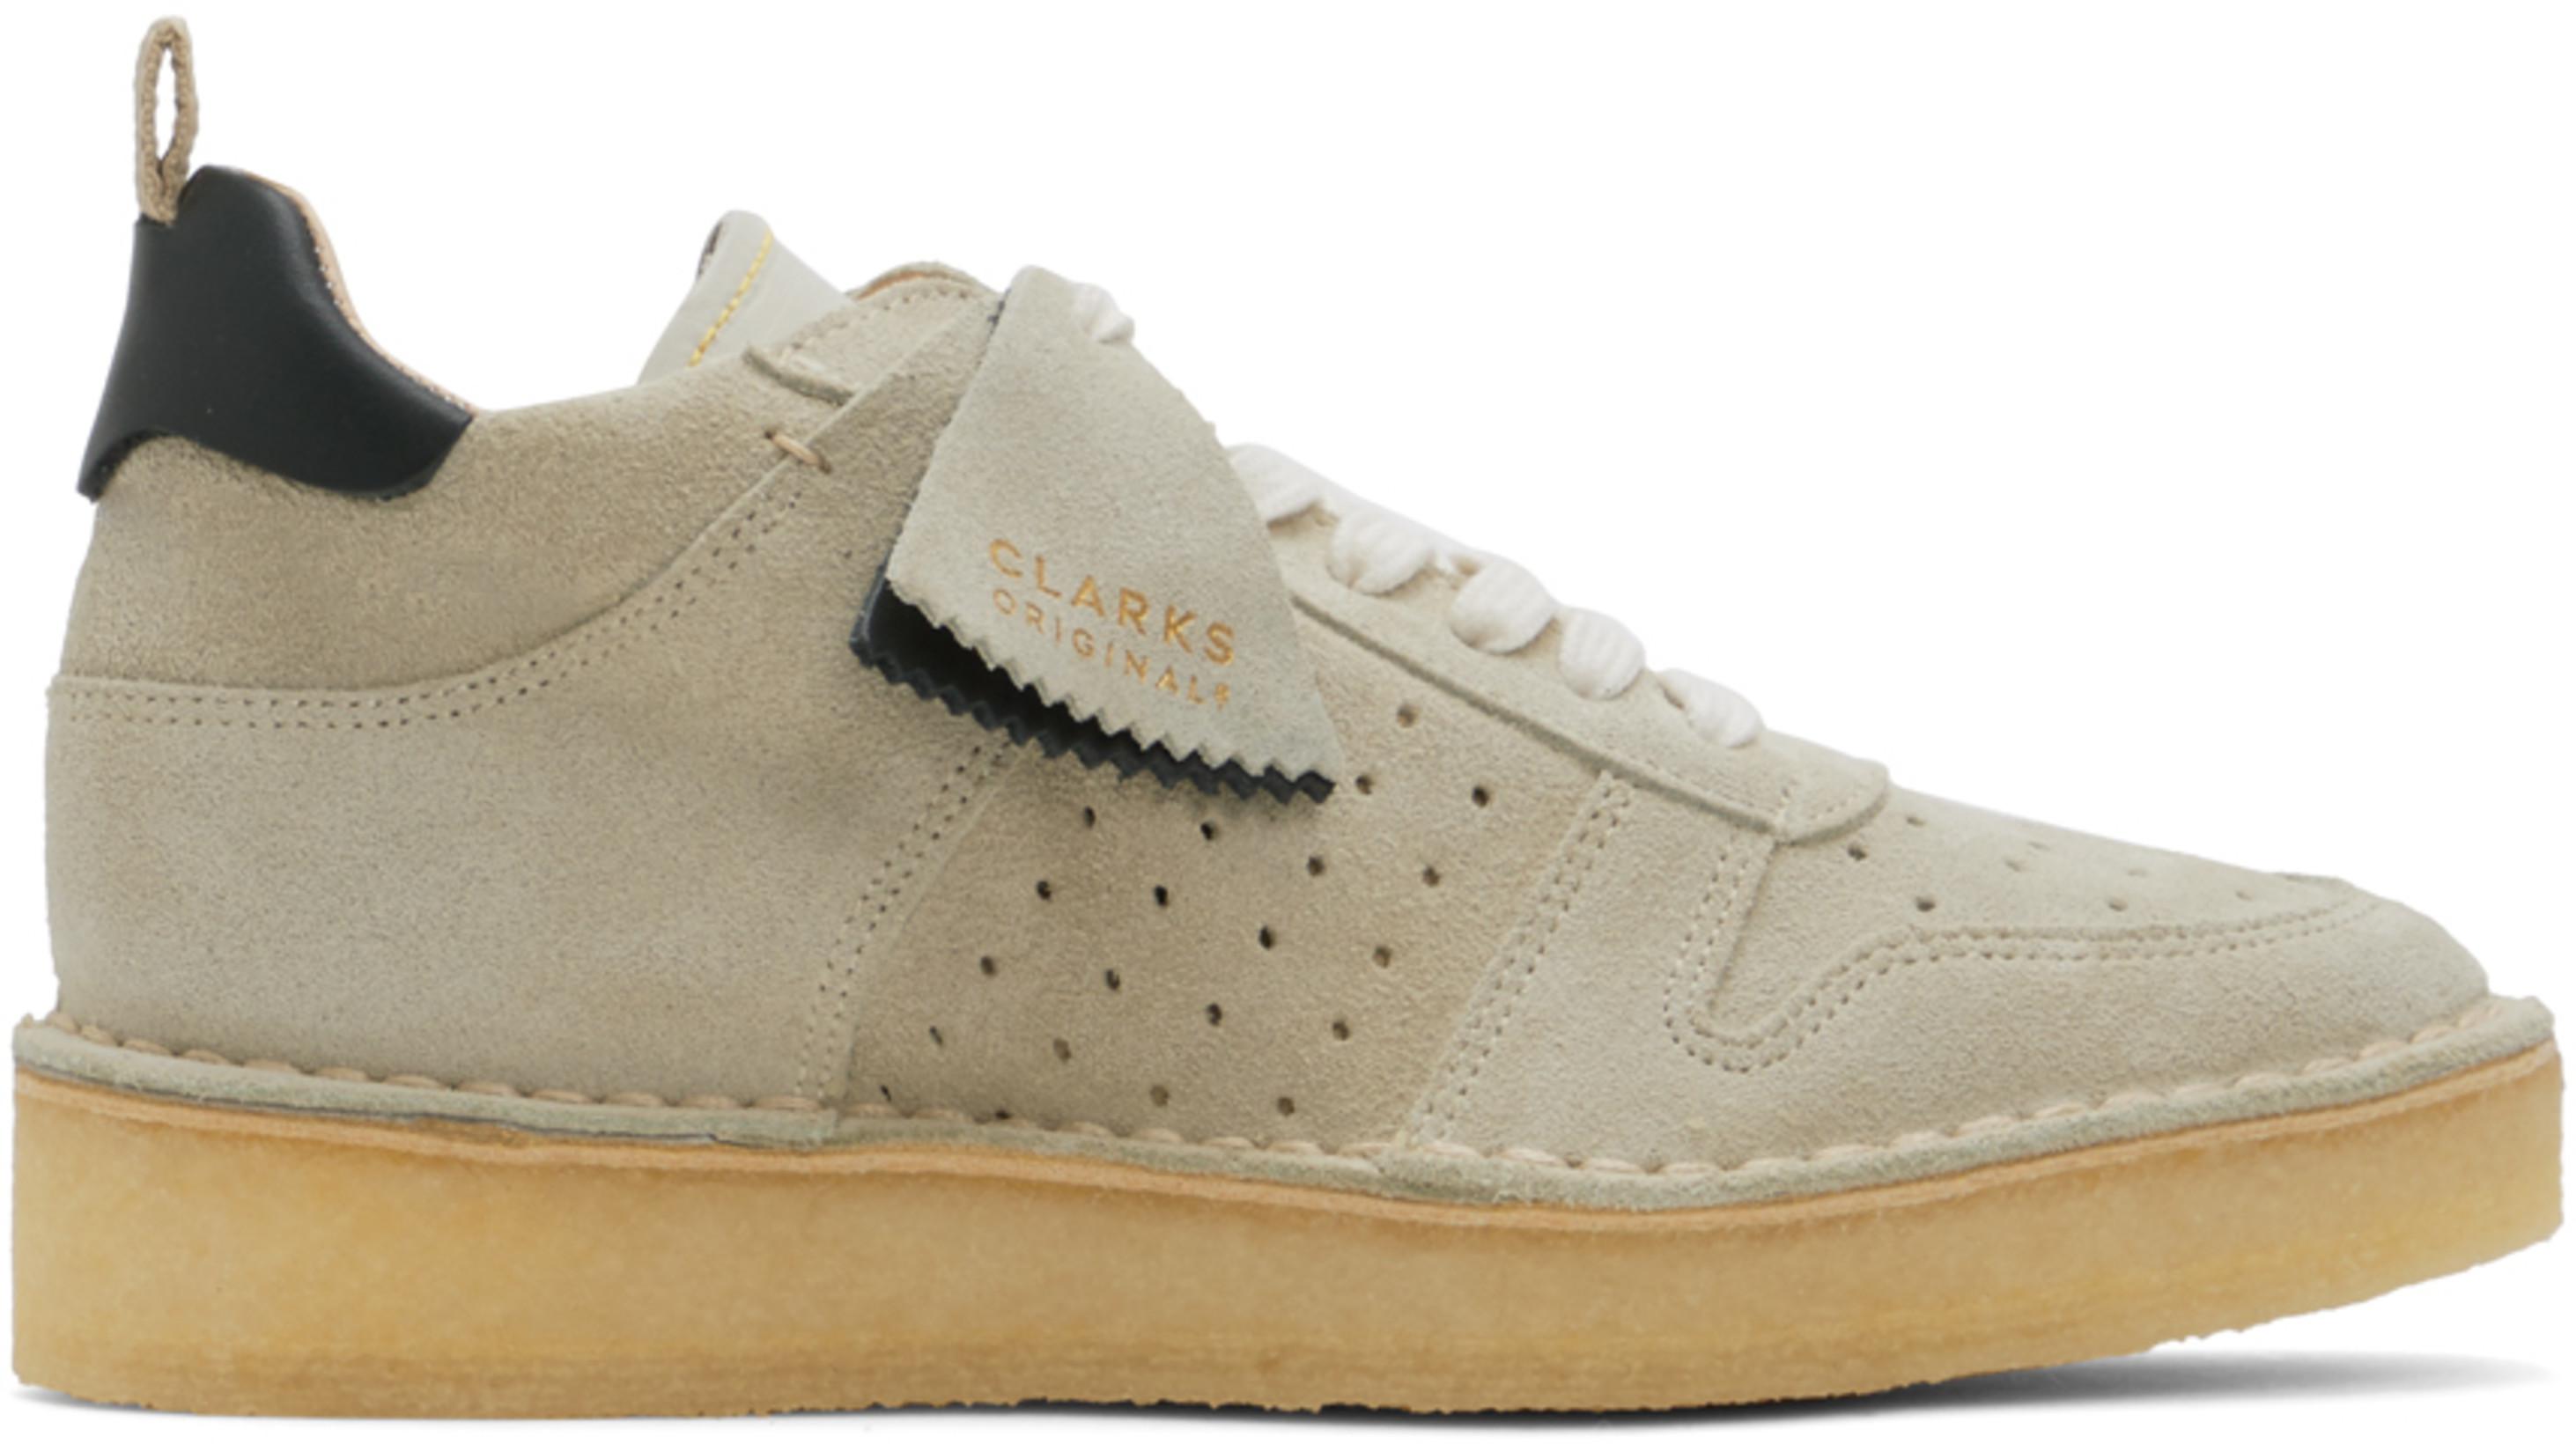 Off-White Desert Run Low Sneakers by CLARKS ORIGINALS